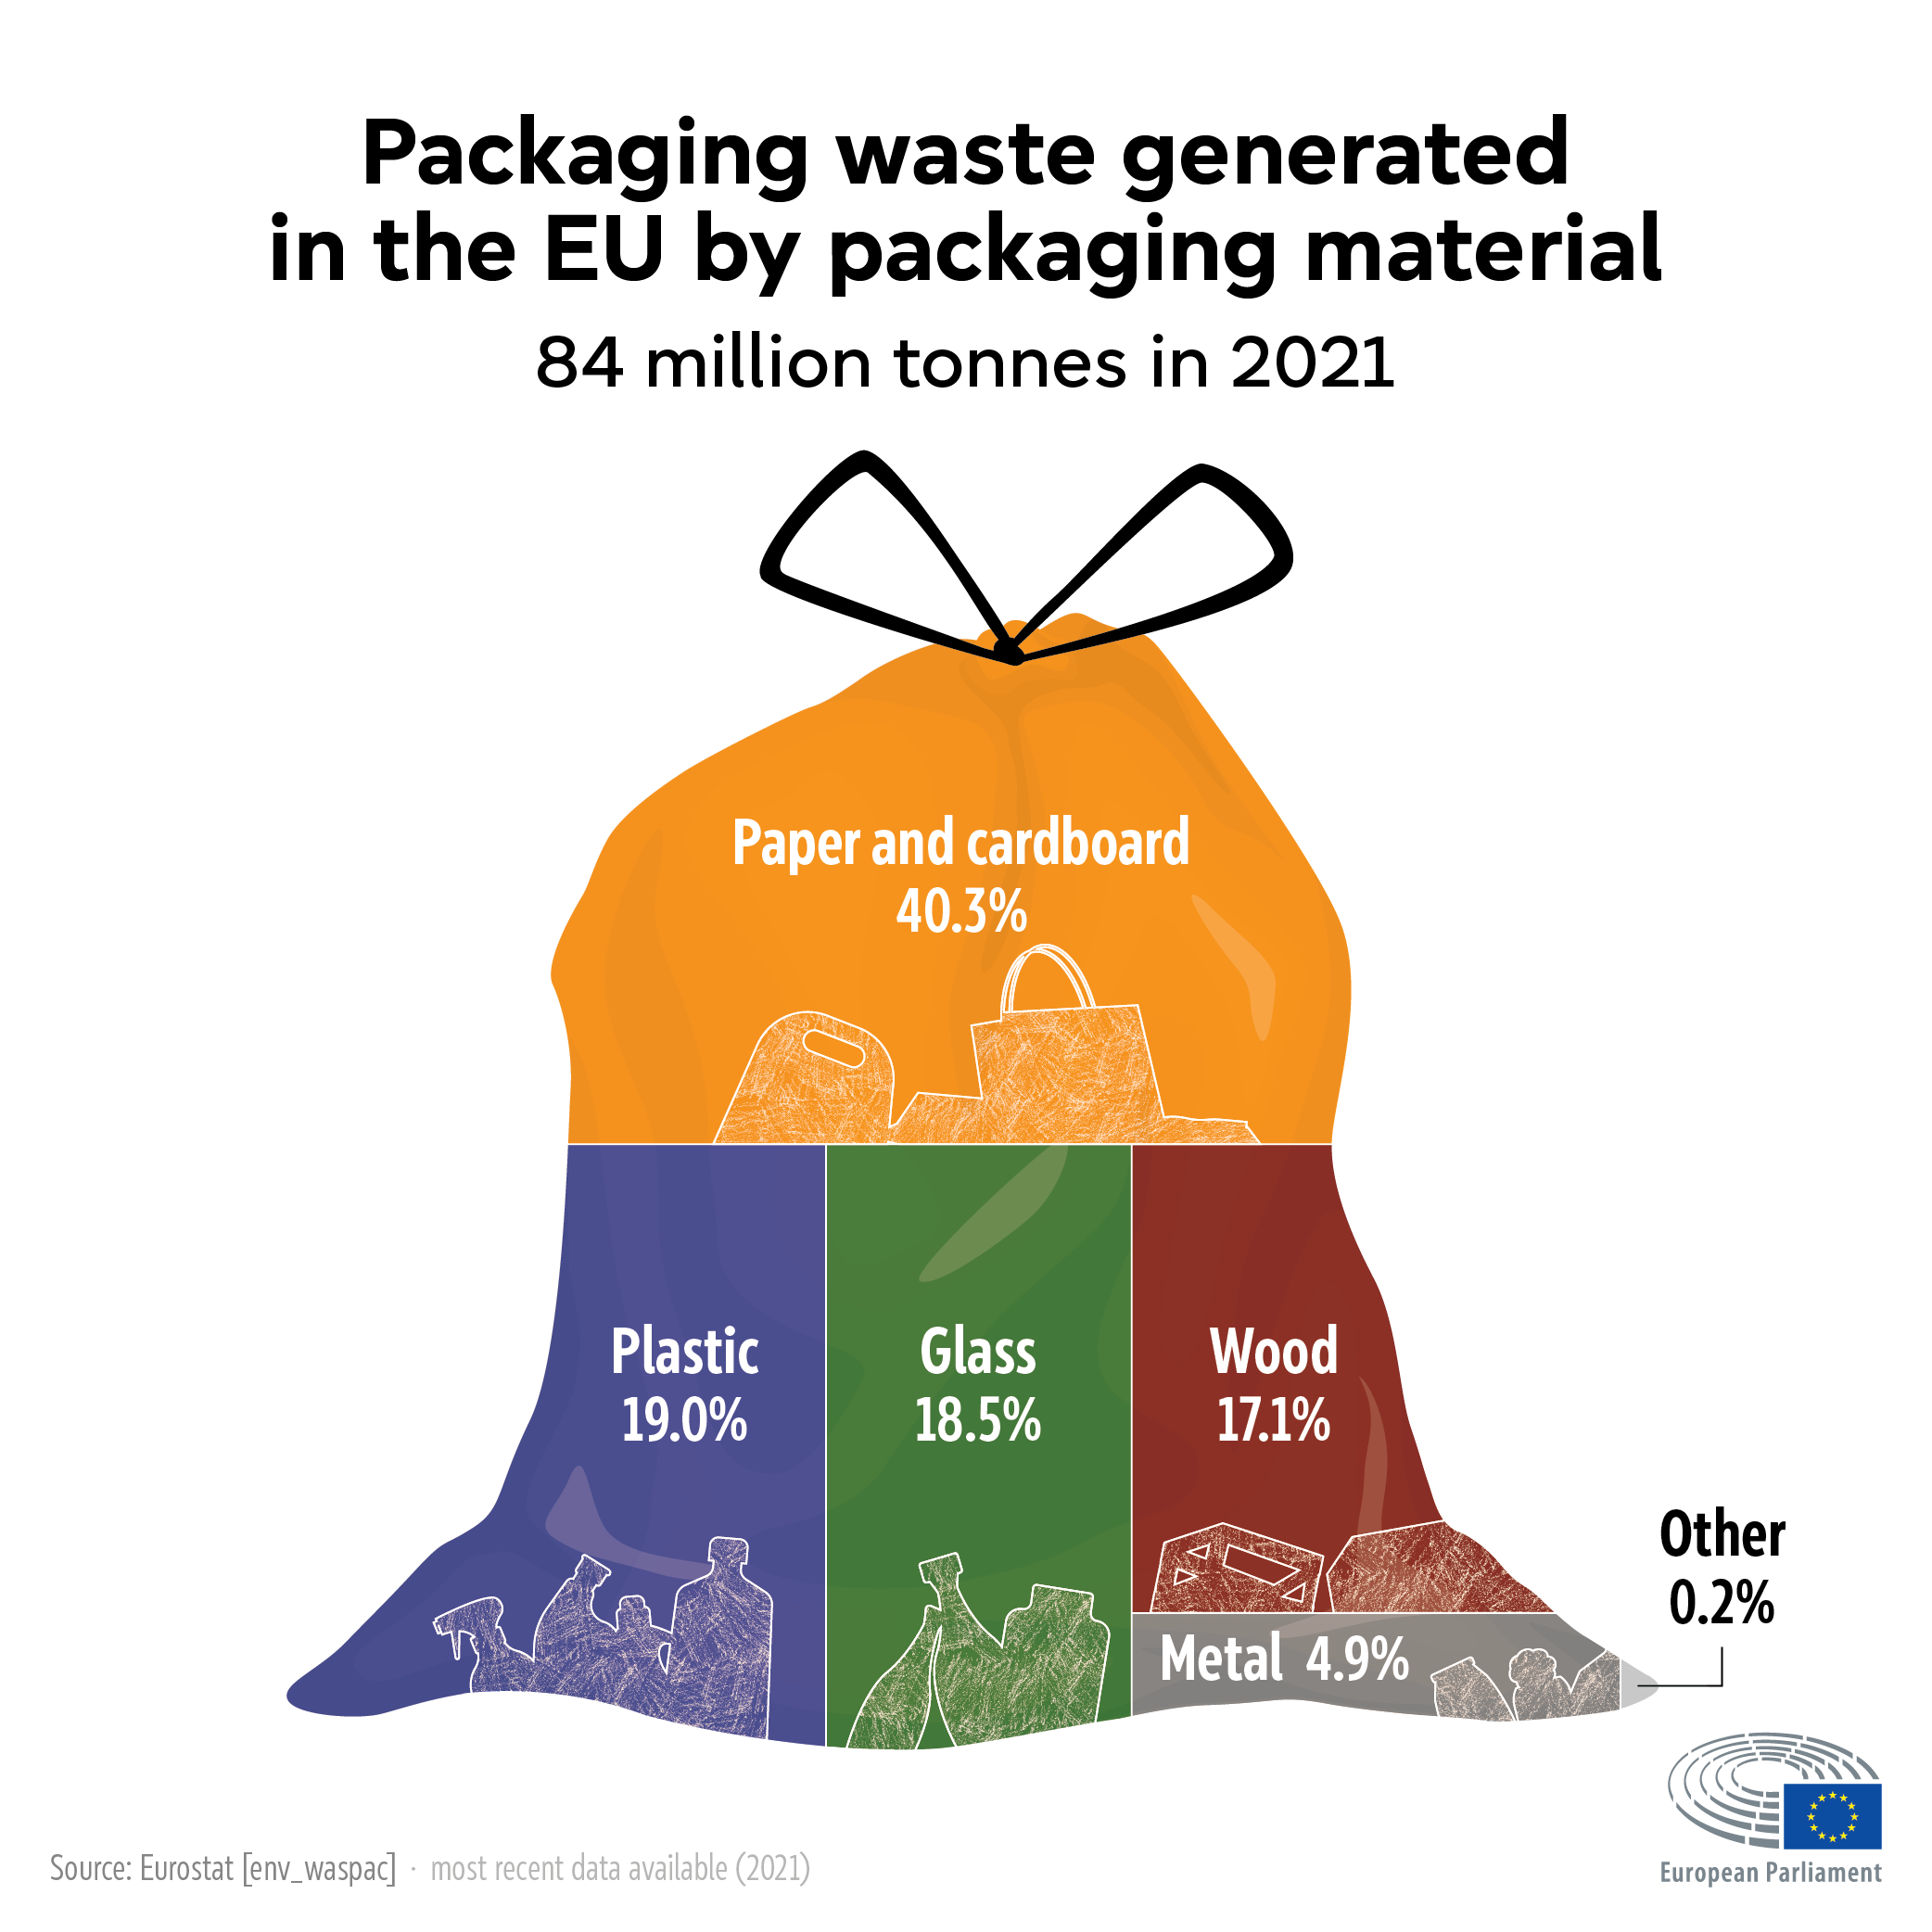 How to reduce packaging waste in the EU